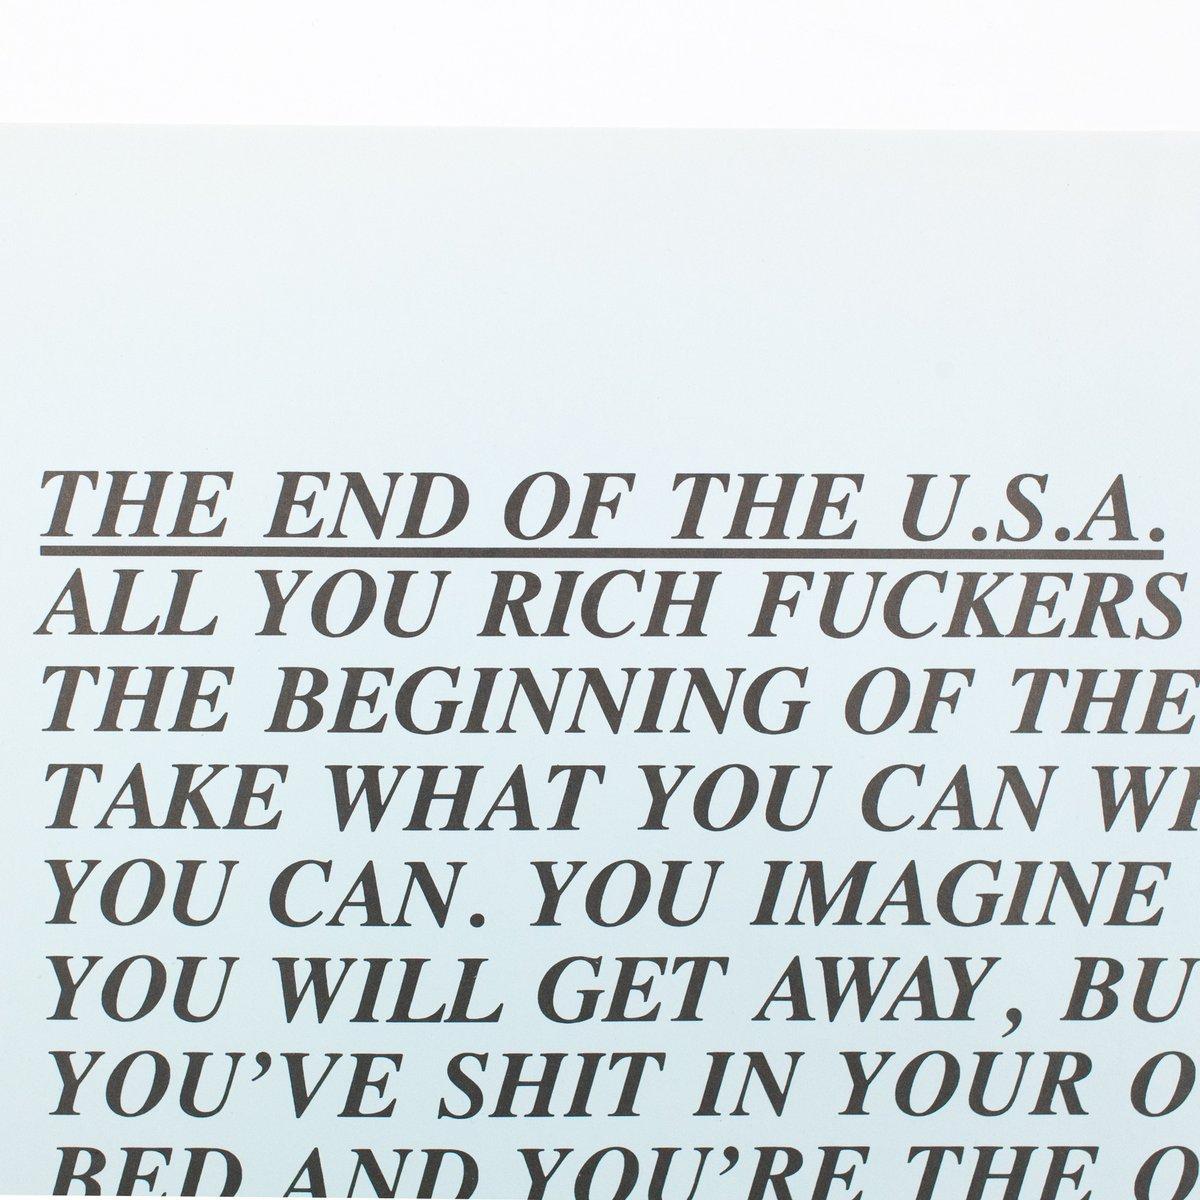 Jenny Holzer is one of the most important and original artists of the 20th century.

Her body of work, with an emphasis on text, is consistently provocative and occasionally frightening, manipulating the language of both pop culture and government